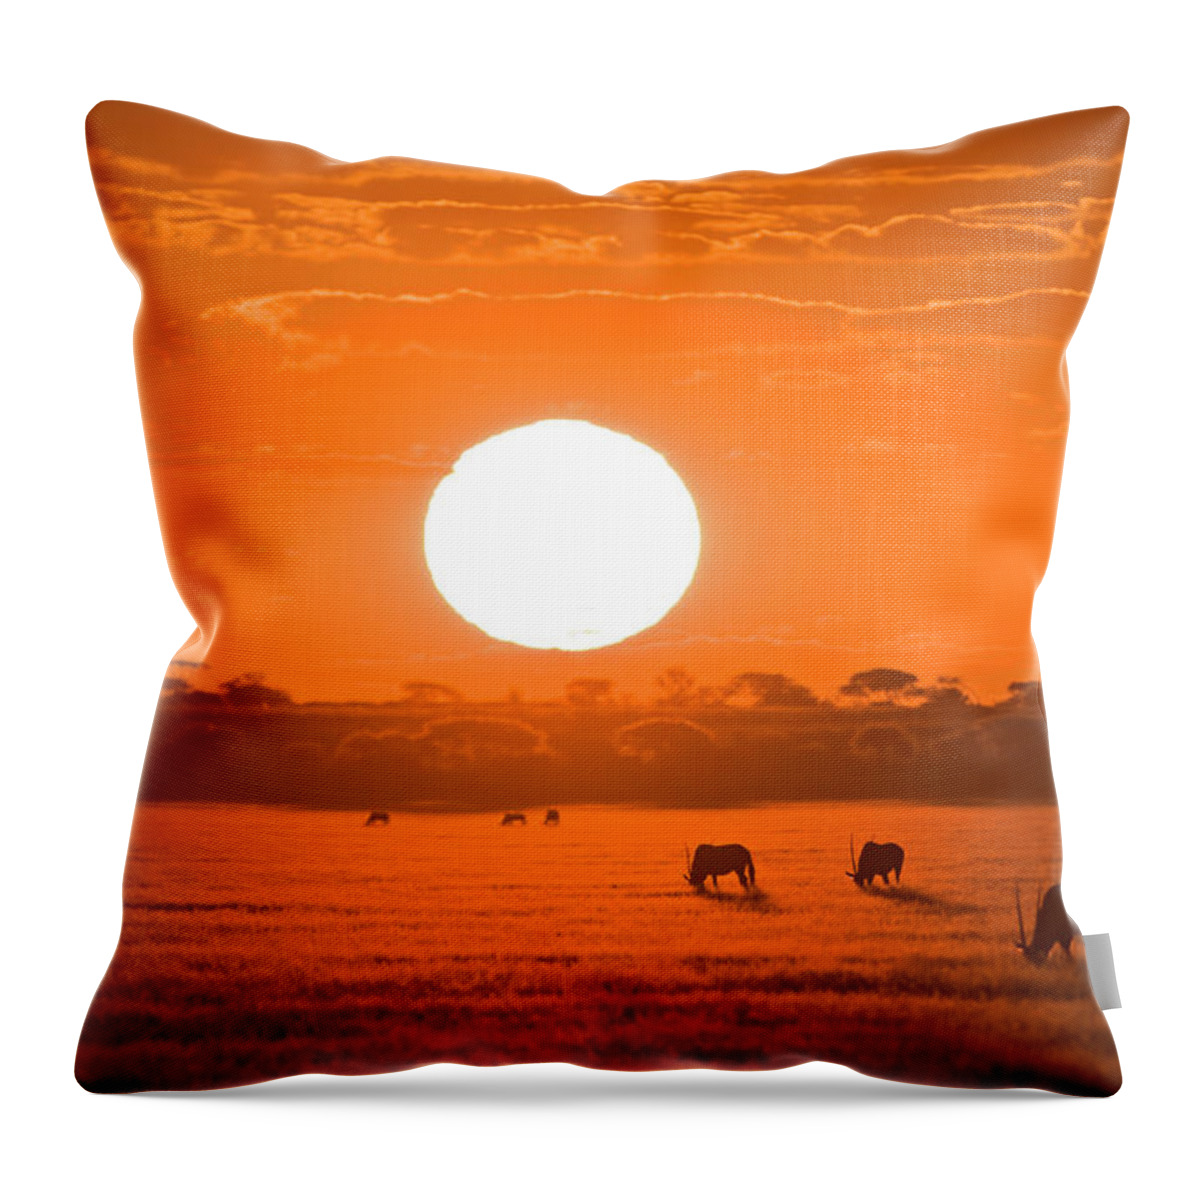 Tranquility Throw Pillow featuring the photograph Africa, Botswana, Silhouette Of Gemsbok by Westend61